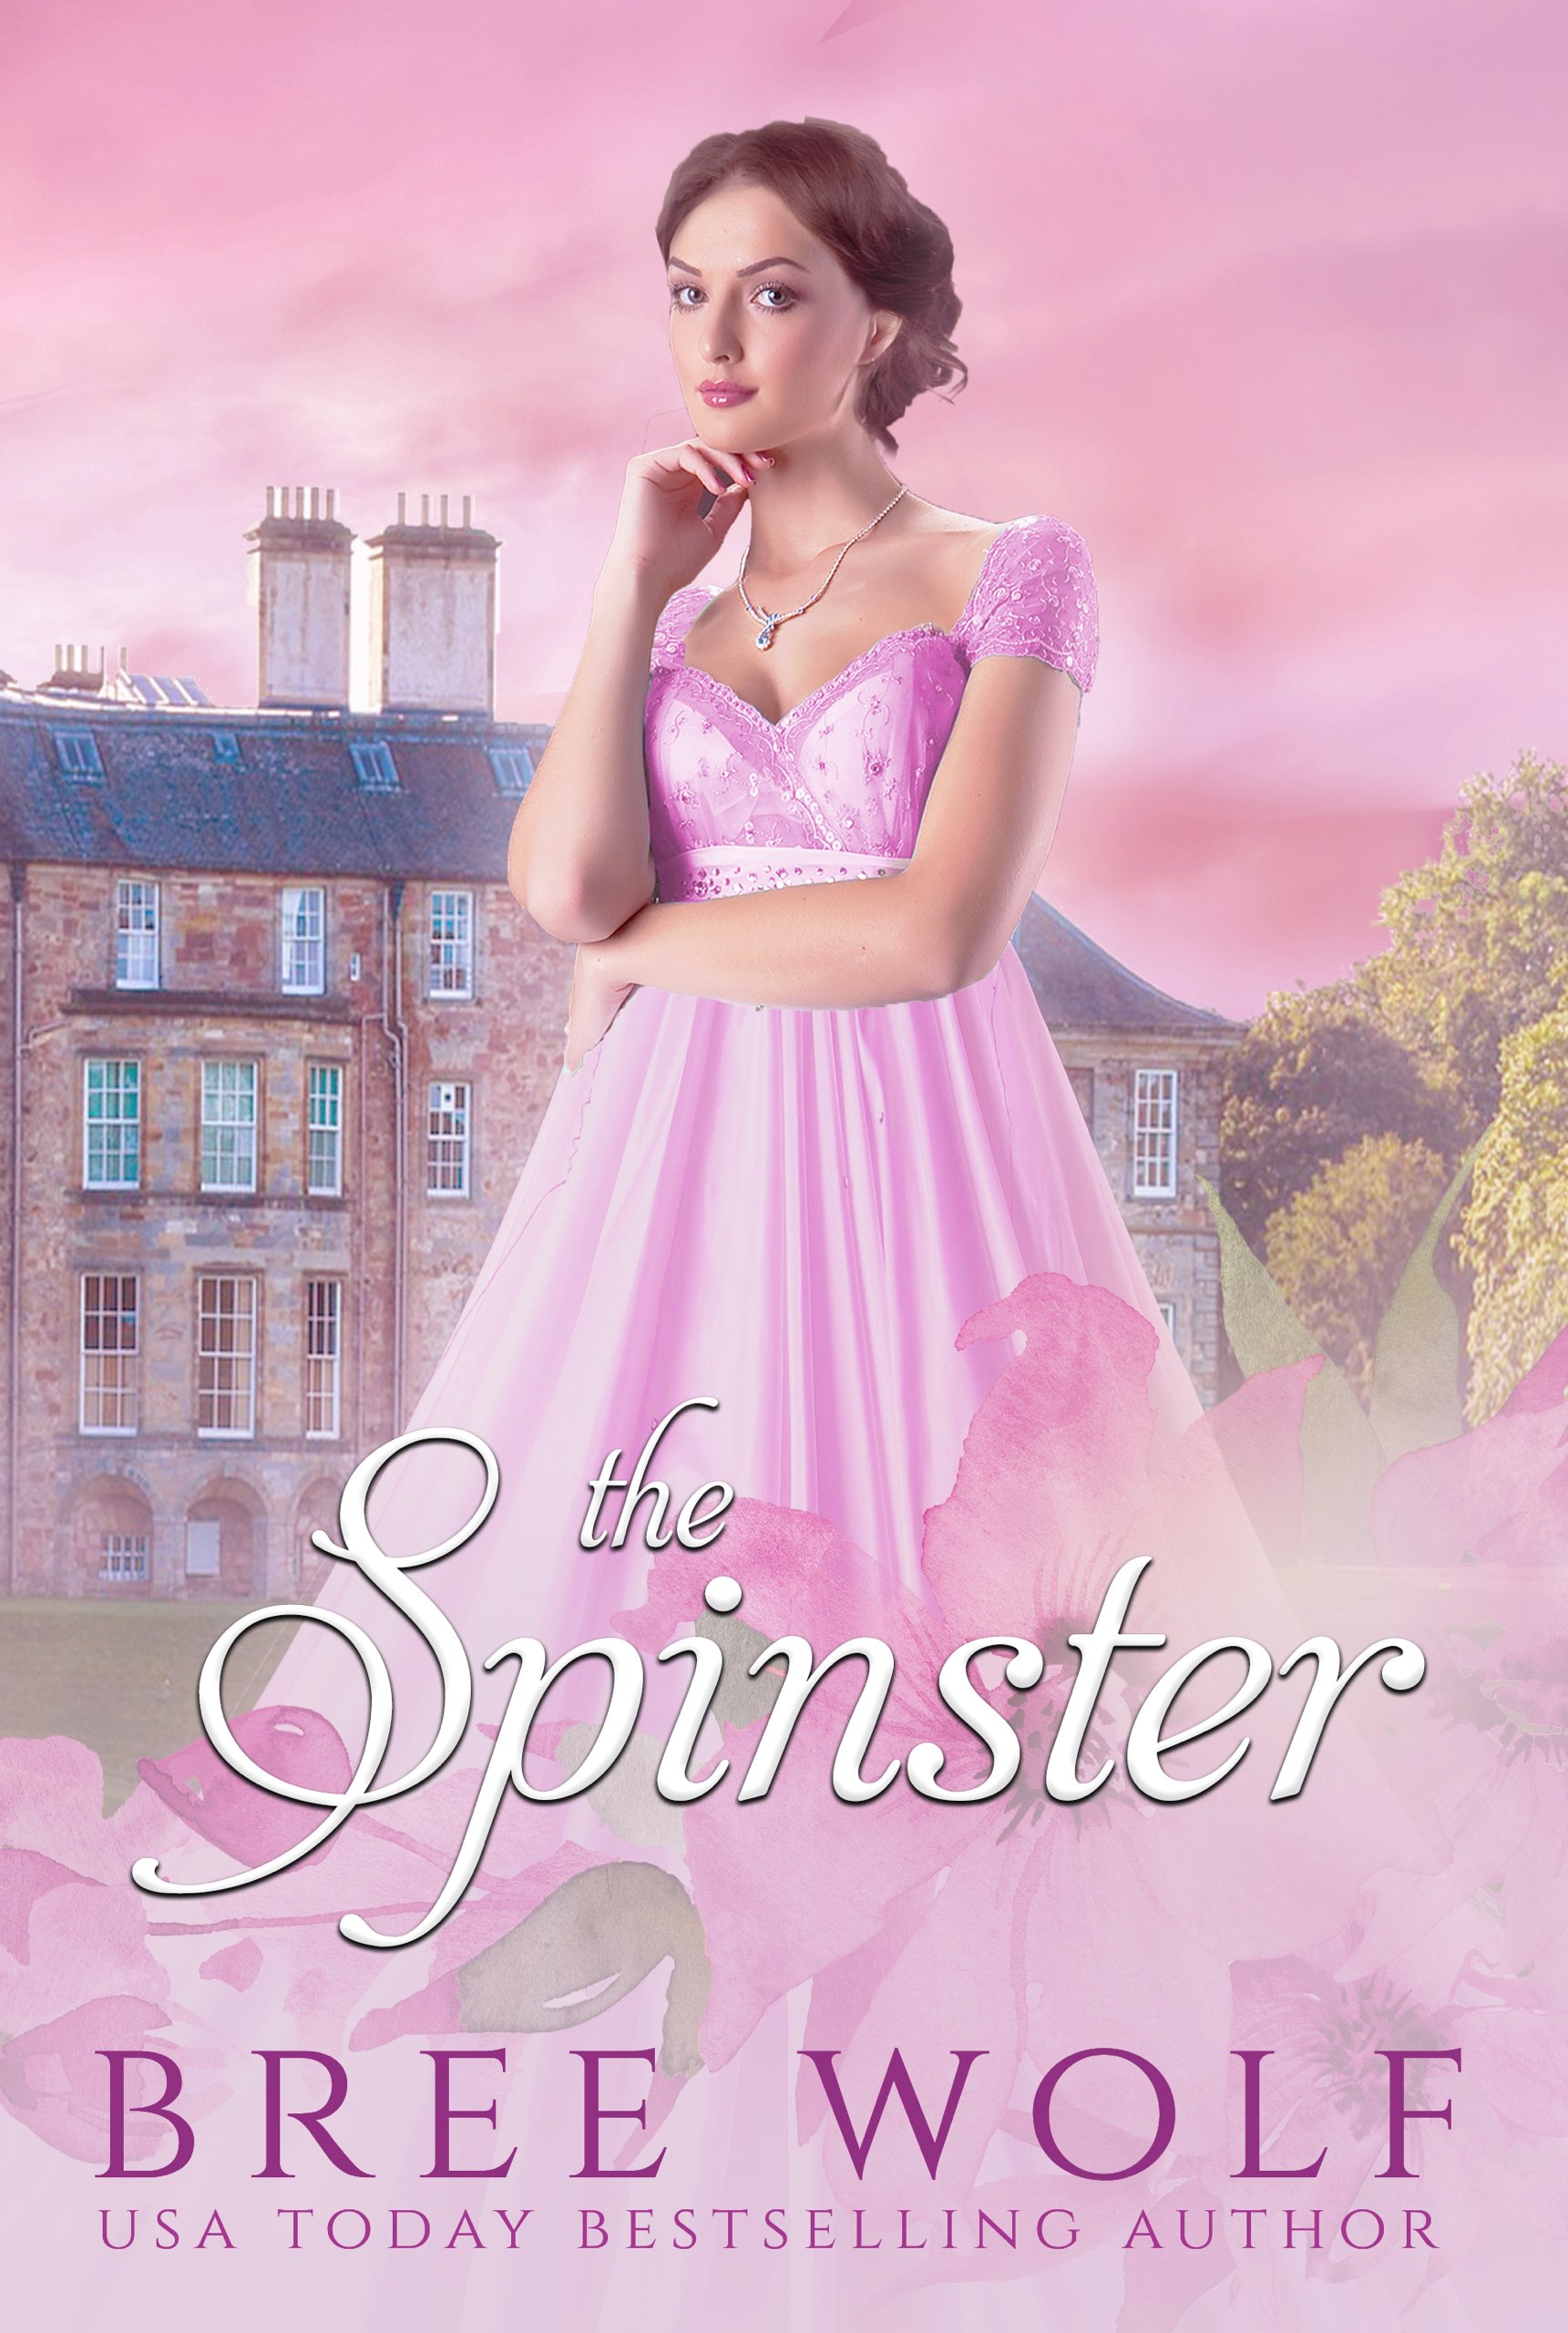 The-Spinster-Generic